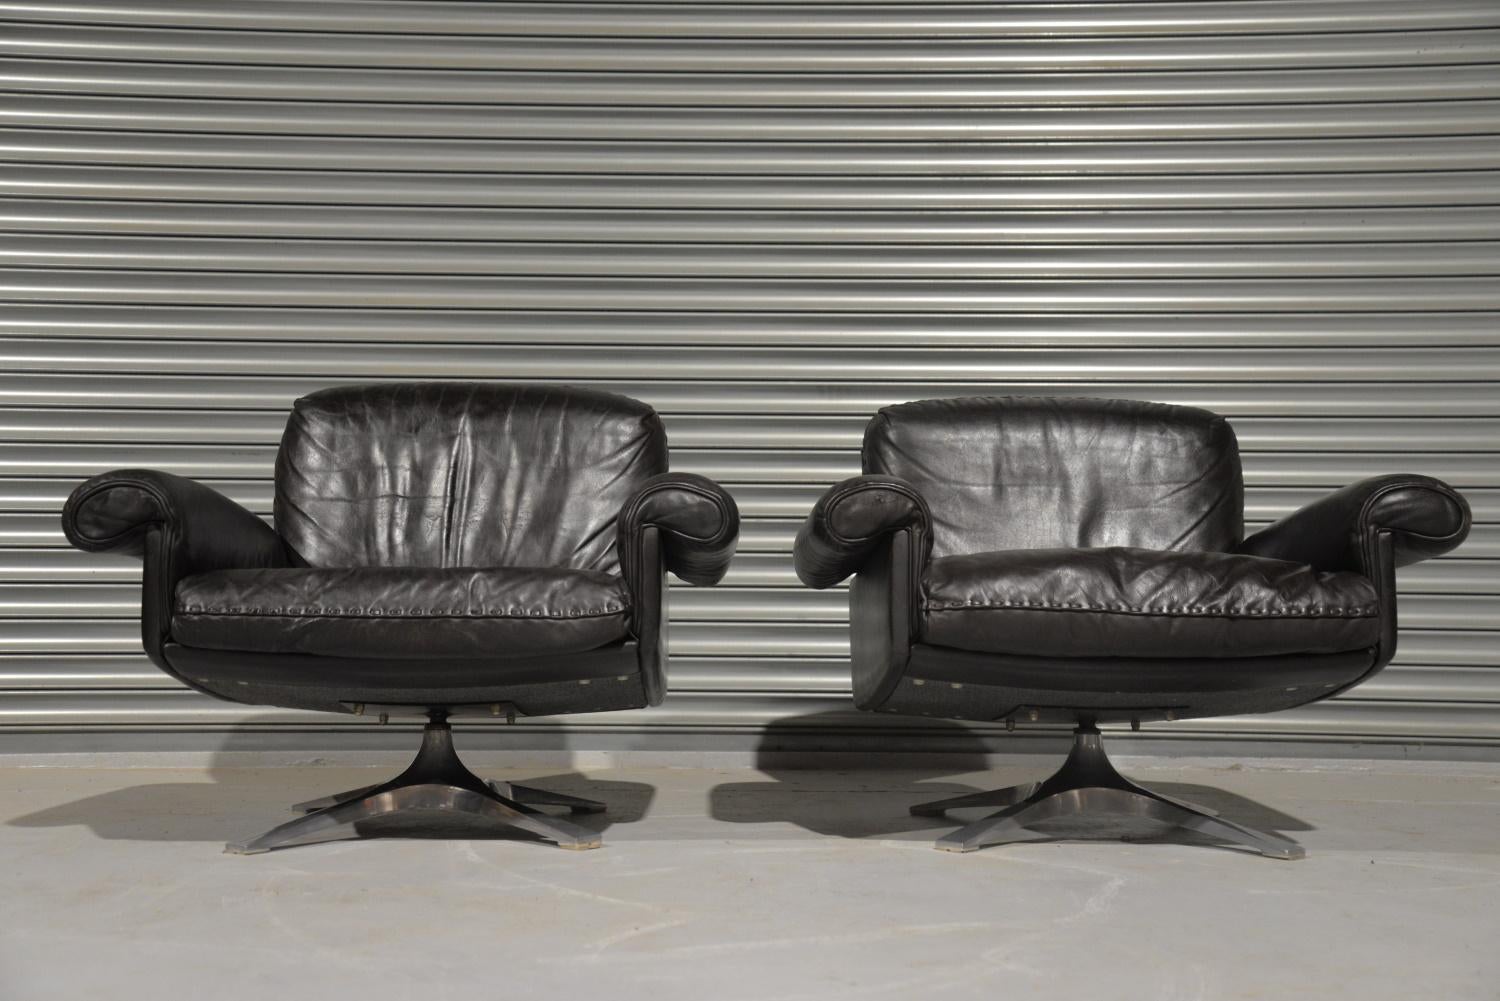 We are delighted to bring to you a pair of highly desirable retro De Sede DS-31 swivel lounge armchairs in beautiful soft dark brown leather with whipstitch edge detail standing on brushed aluminium swivel bases. Hand built in the early 1970s by De